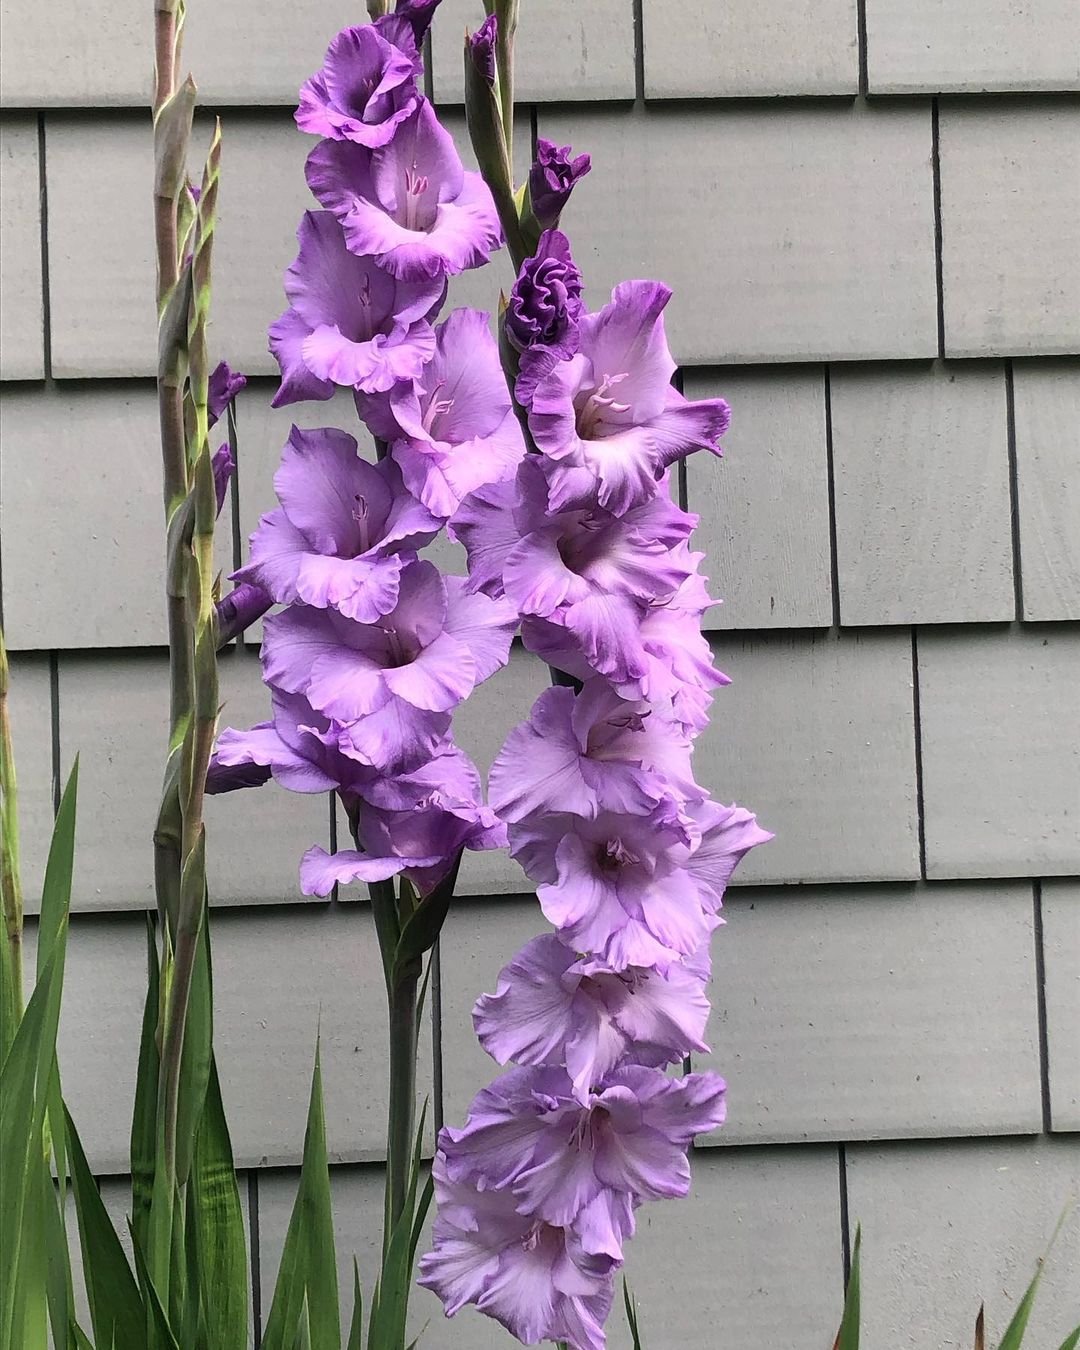 Purple Gladiolus flower blooming in front of a house.